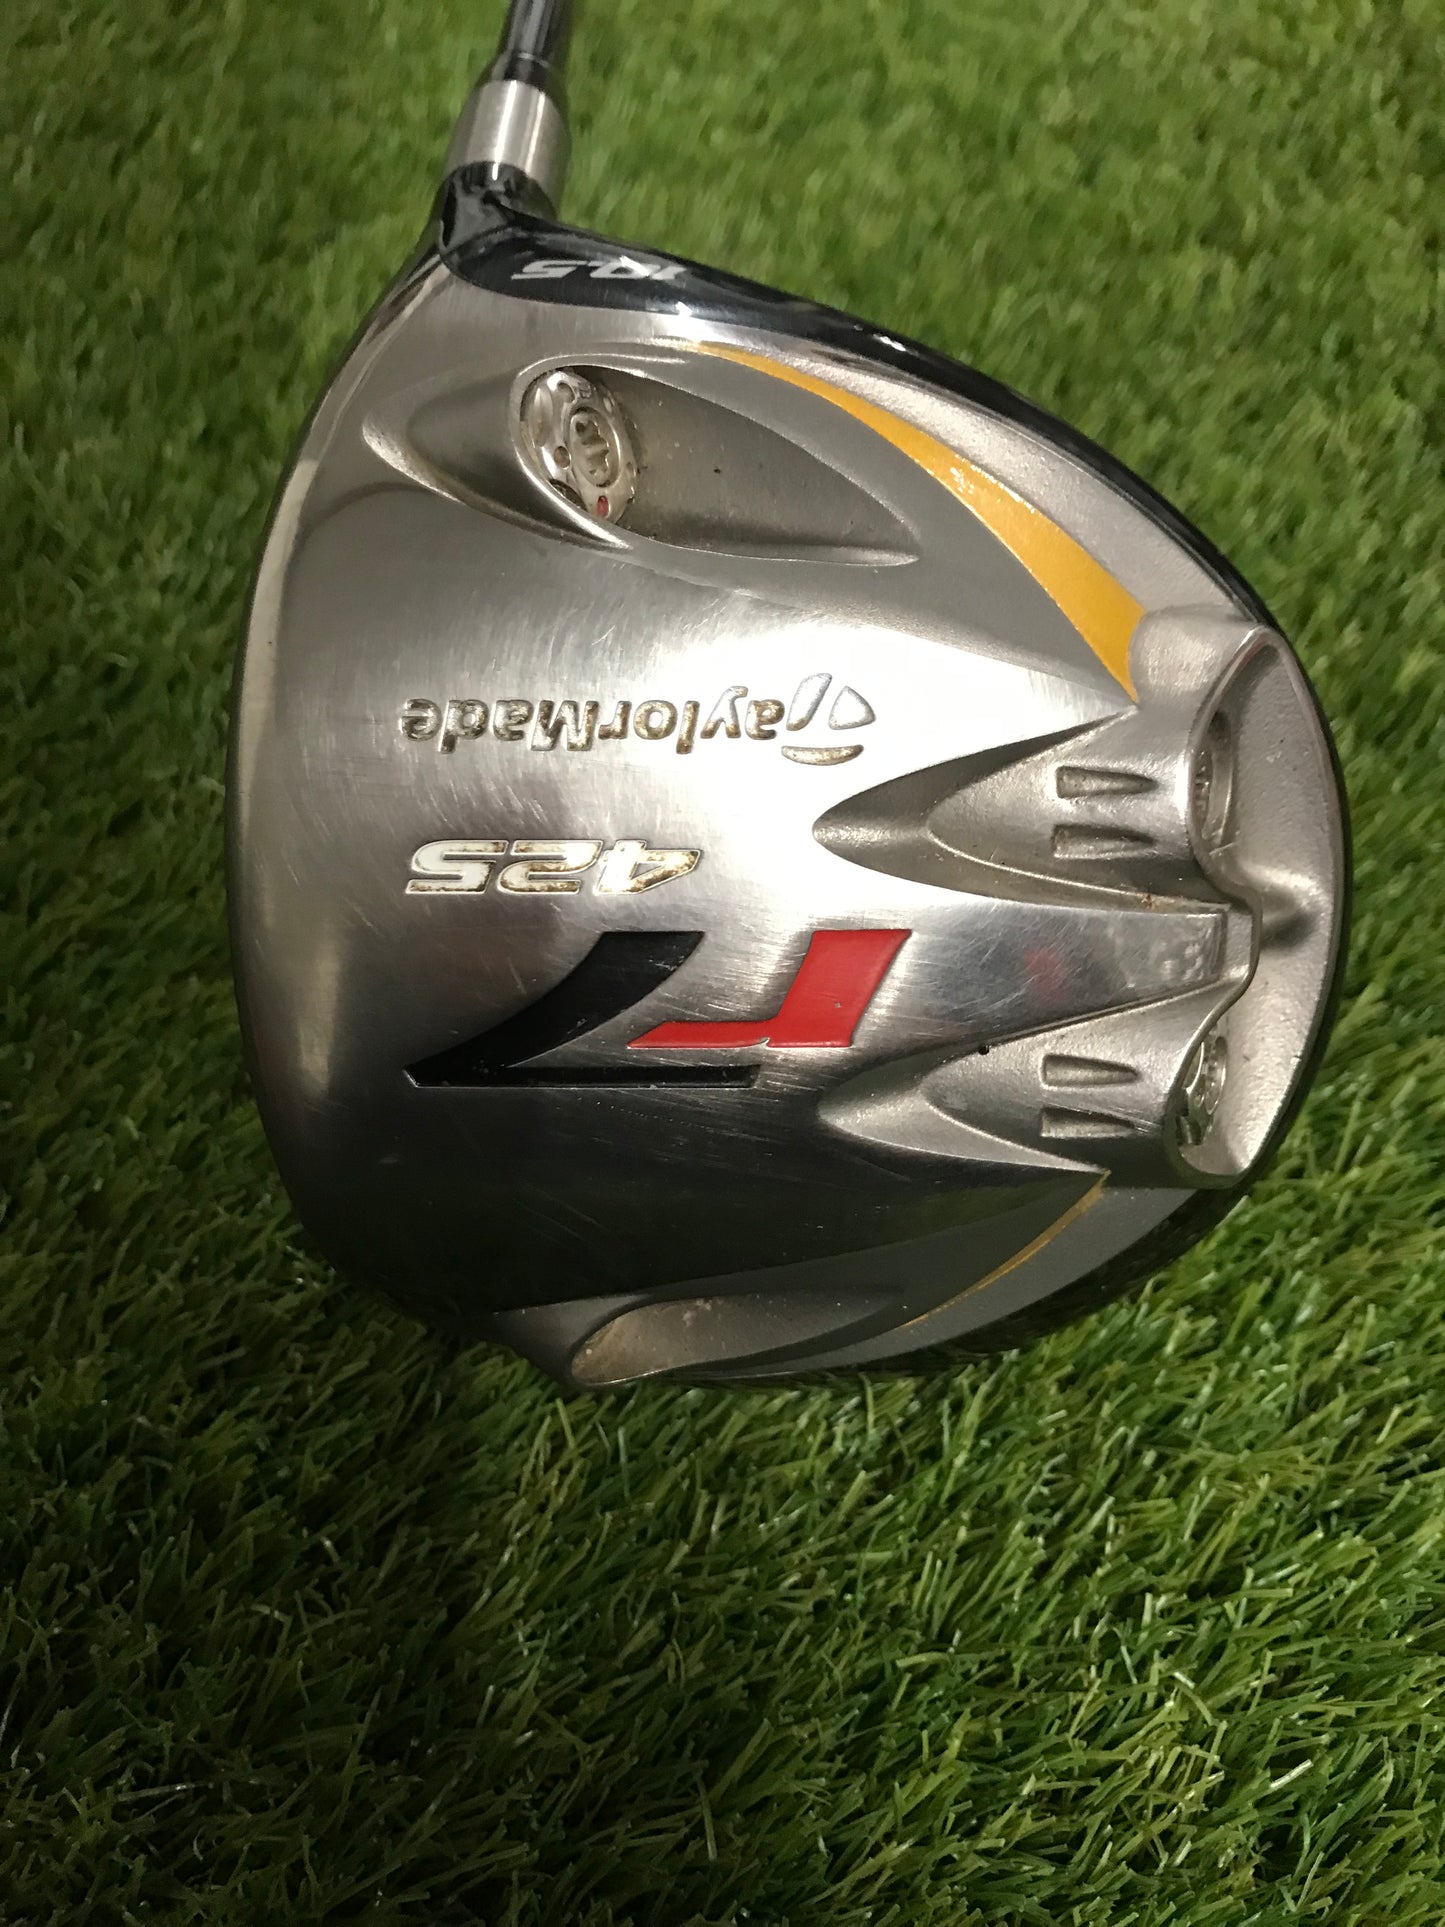 TaylorMade R7 425 10.5 Driver